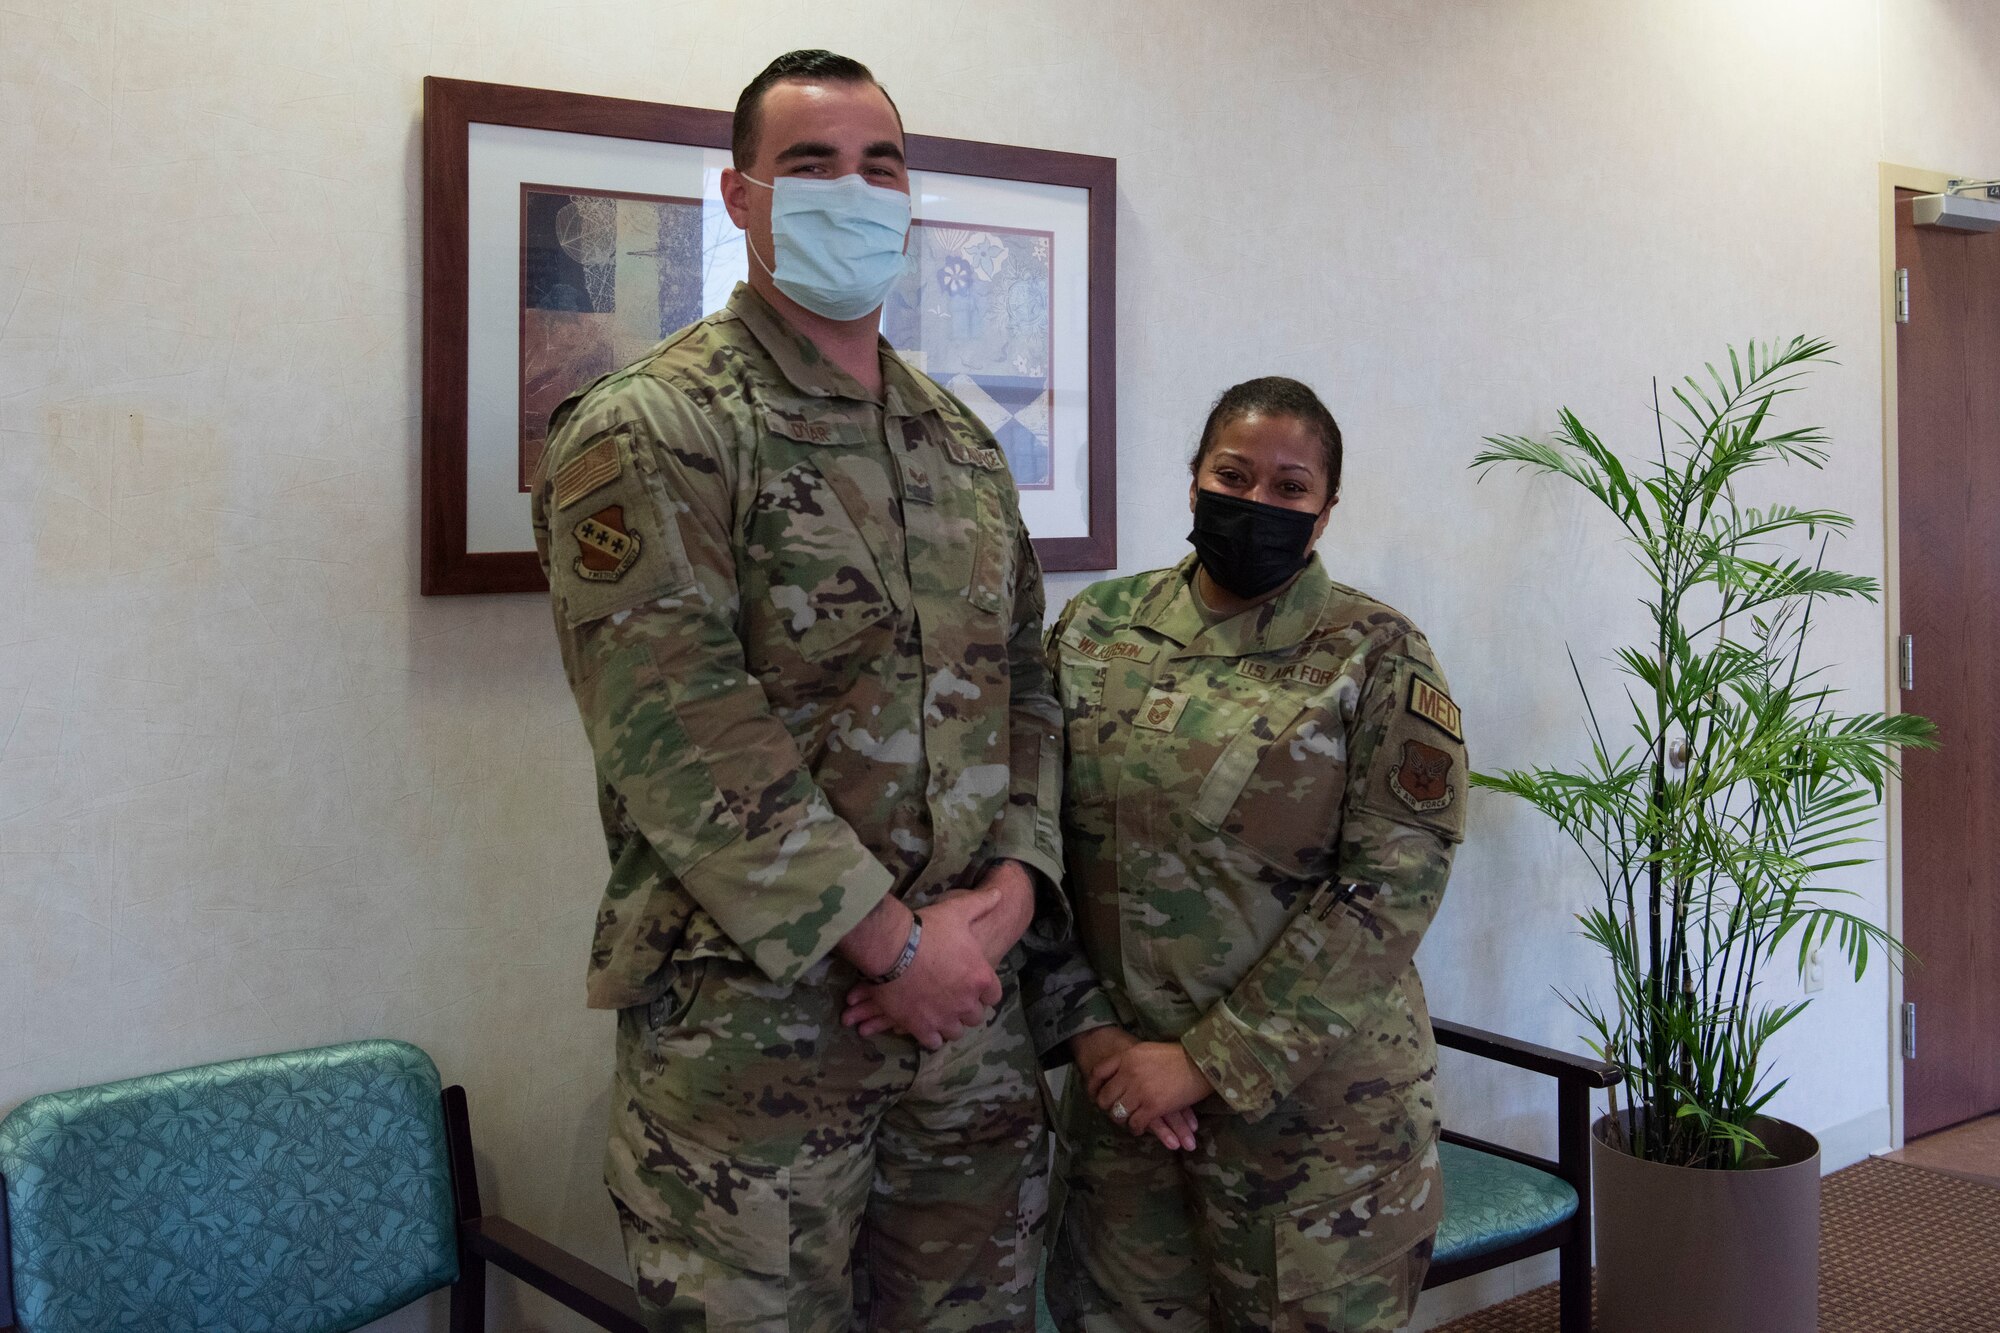 Chief Master Sgt. Taliah Wilkerson, Air Force Readiness Agency's Aerospace Medical Service and Surgical Service Career Field Manager, poses with Senior Airman Dillon Dyar, 7th Operational Medical Readiness Squadron flight medicine independent duty medical technician, during her visit at Dyess Air Force Base, Texas, February 22, 2023. Brigadier General Jeannine Ryder, 59th Medical Wing commander and chief of the Air Force Nurse Corps, and Wilkerson provided a strategic overview and future posture of the Total Nursing Force at the 7th Medical Group, while also learning about the different mission sets by the Airmen. (U.S. Air Force photo by Airman 1st Class Alondra Cristobal Hernandez)